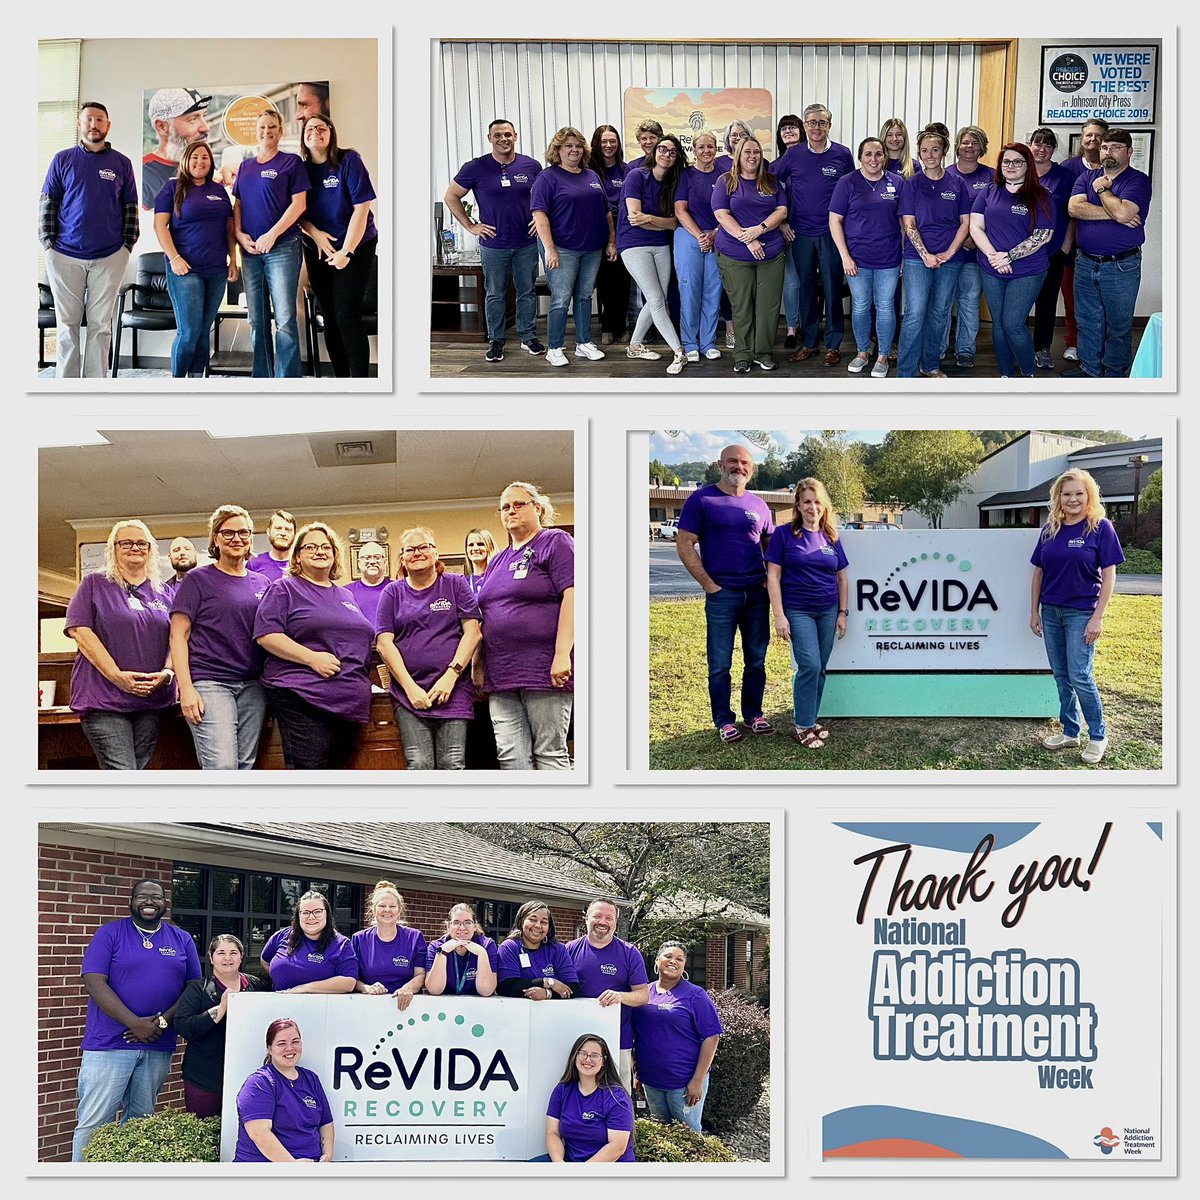 It’s National Addiction Treatment Week!
@ReVIDARecovery would like to thank our addiction medicine professionals at #teamReVIDA who work tirelessly to promote safe and healthy communities! 
#ThankYou #NATW #ASAM #AddictionMedicine #reclaiminglives #TreatAddictionSaveLives